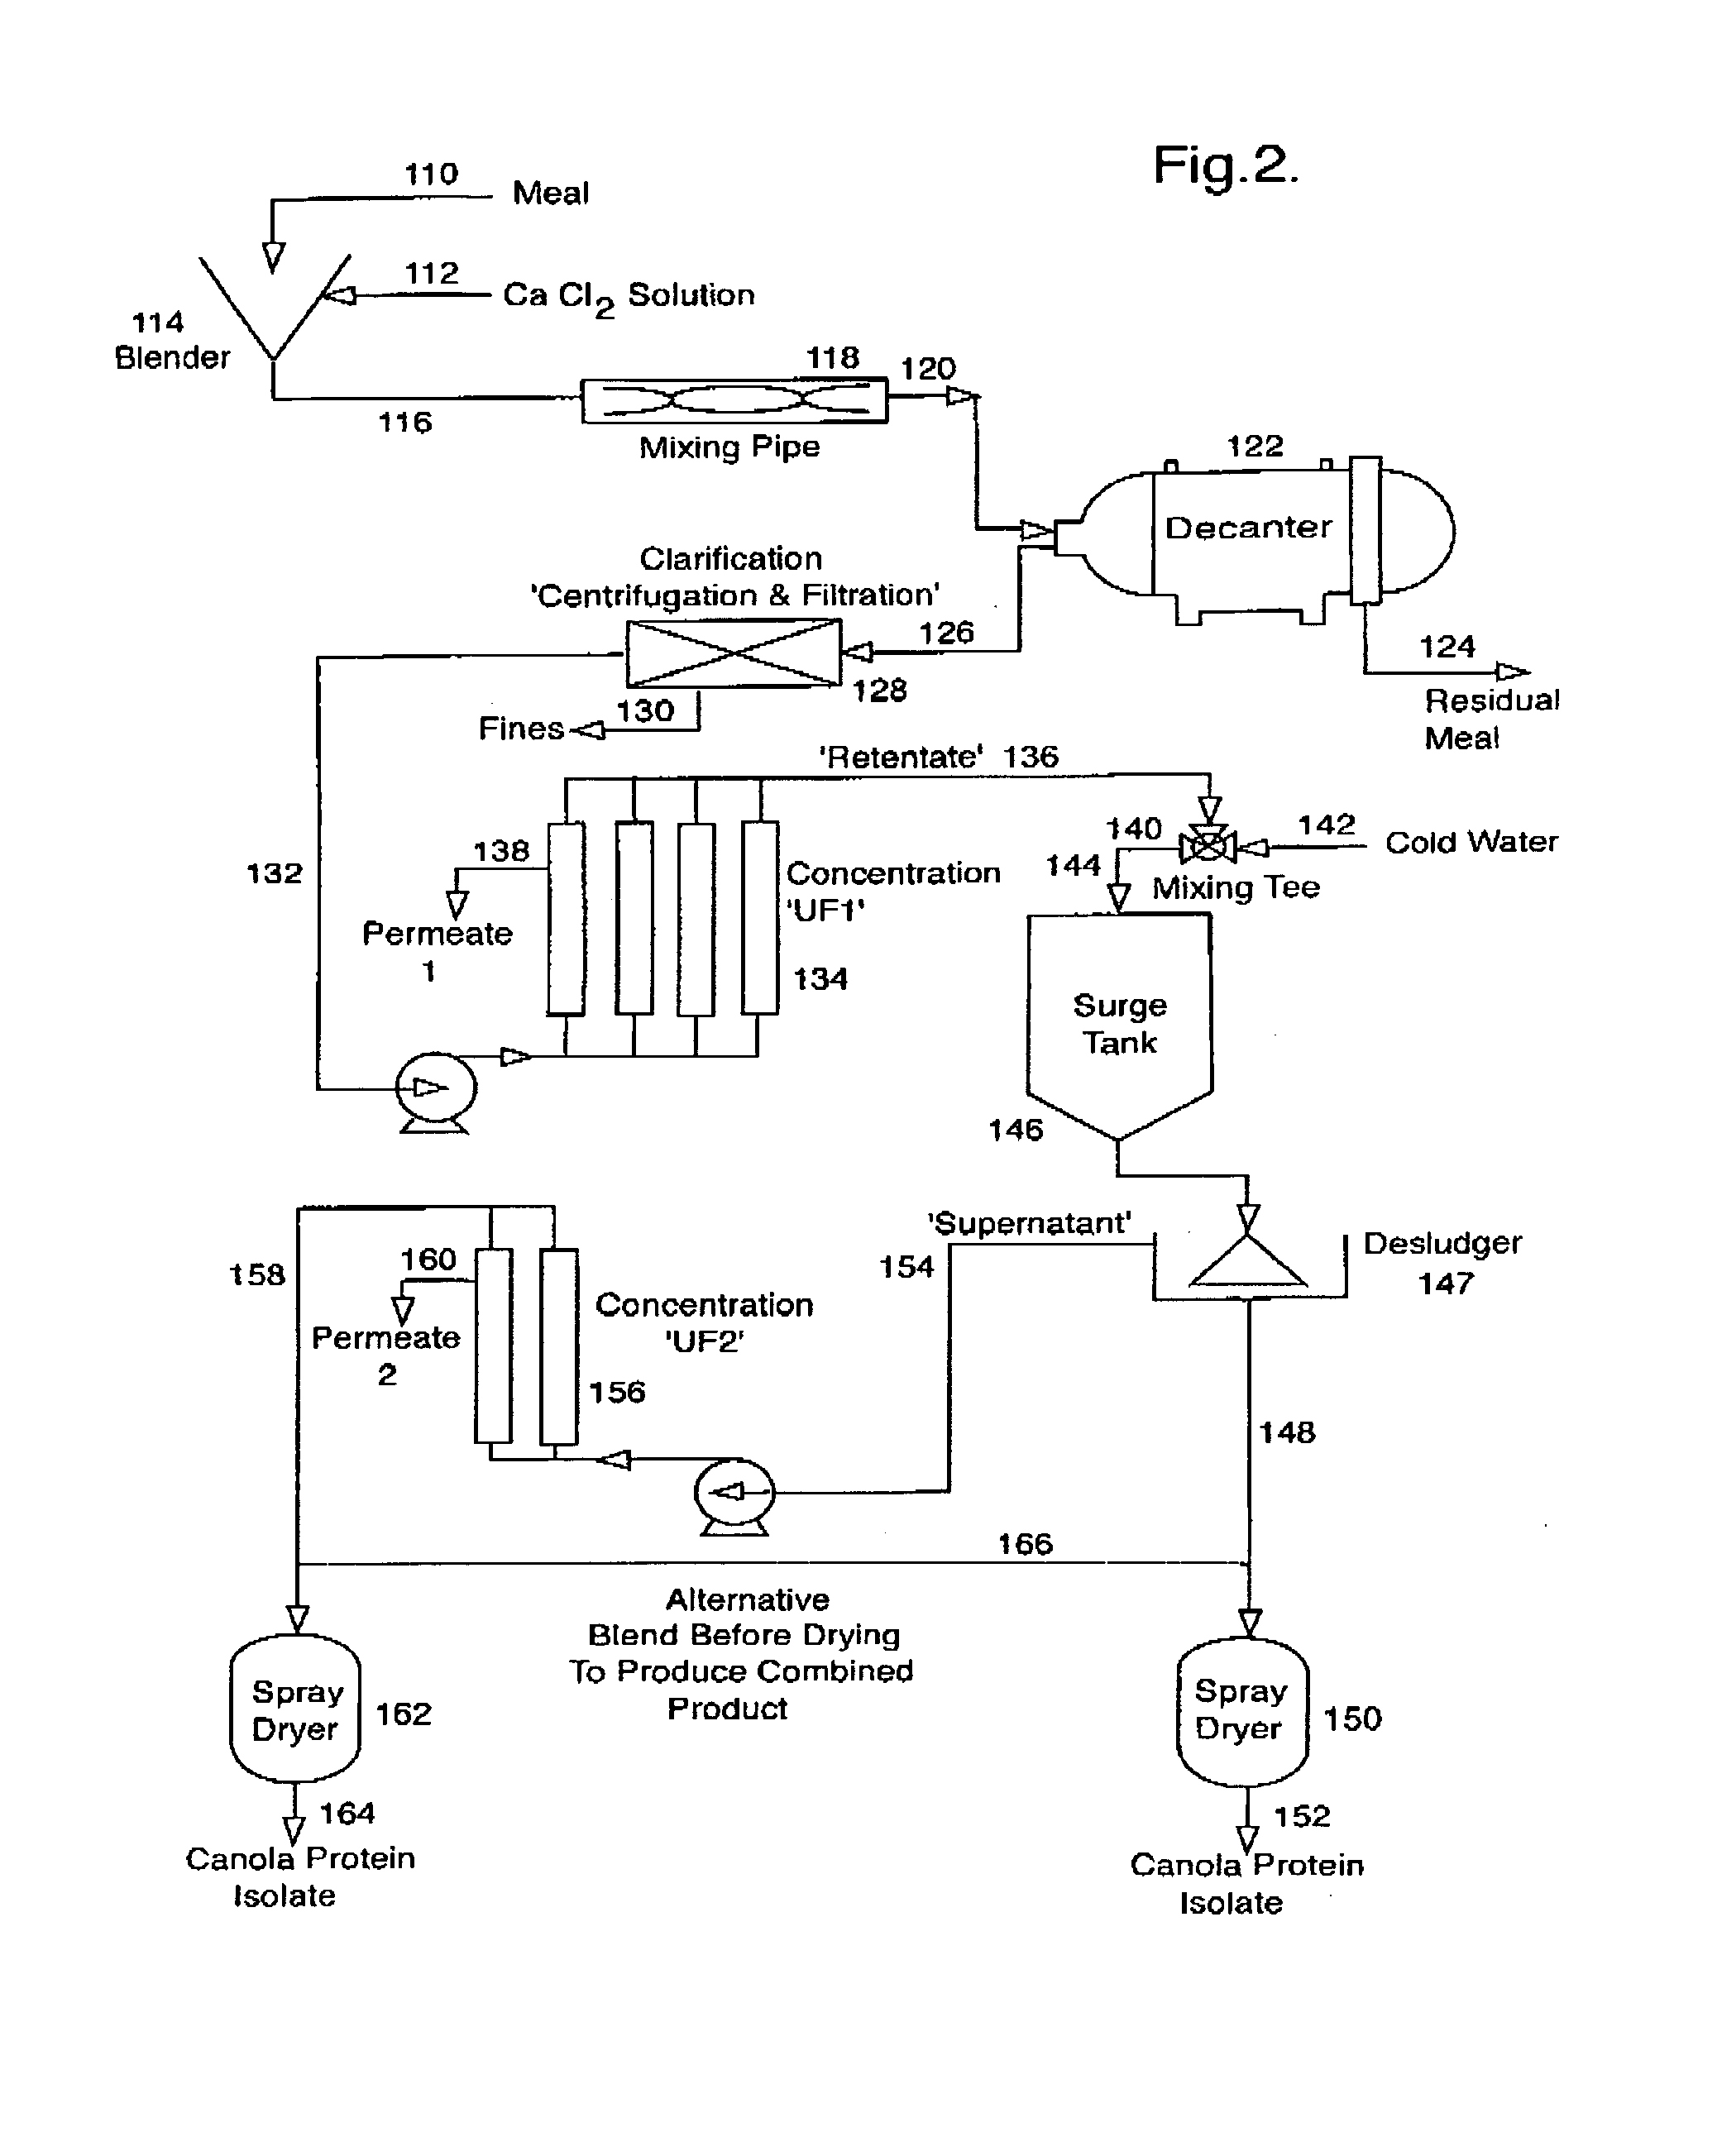 Protein isolation procedures for reducing phytic acid